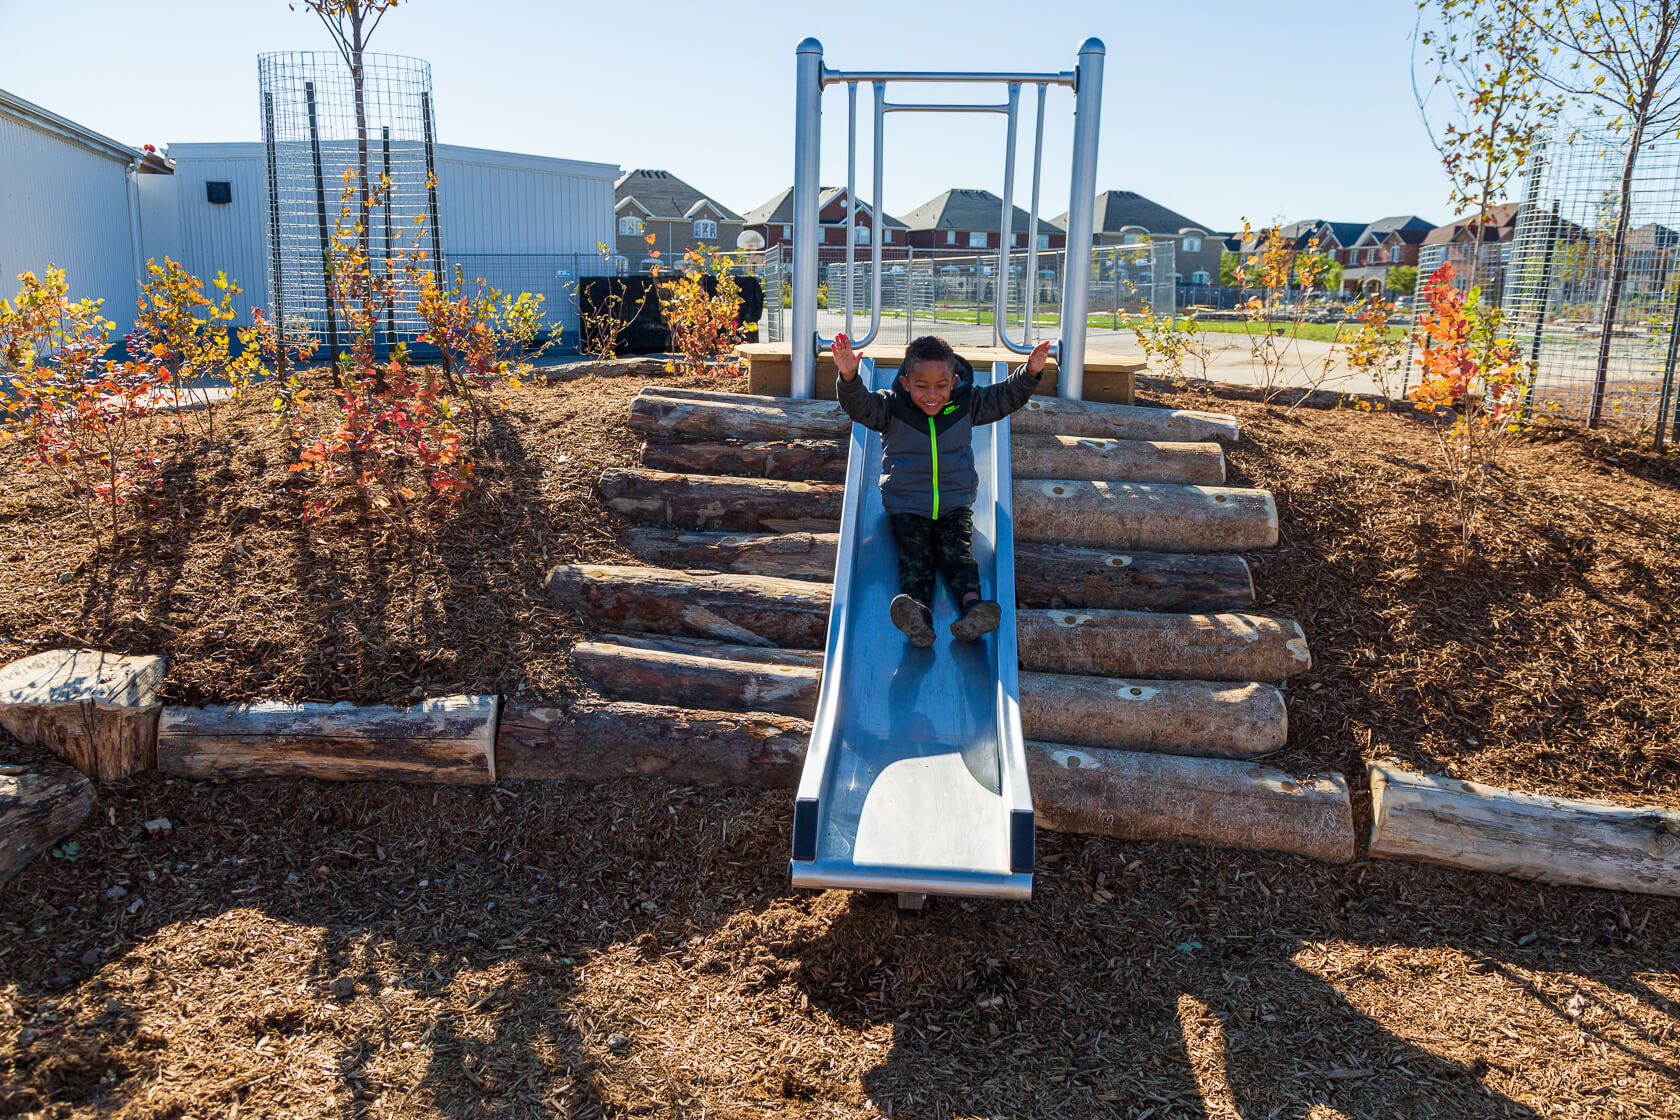 Slide in playground at Irma Coulson public school